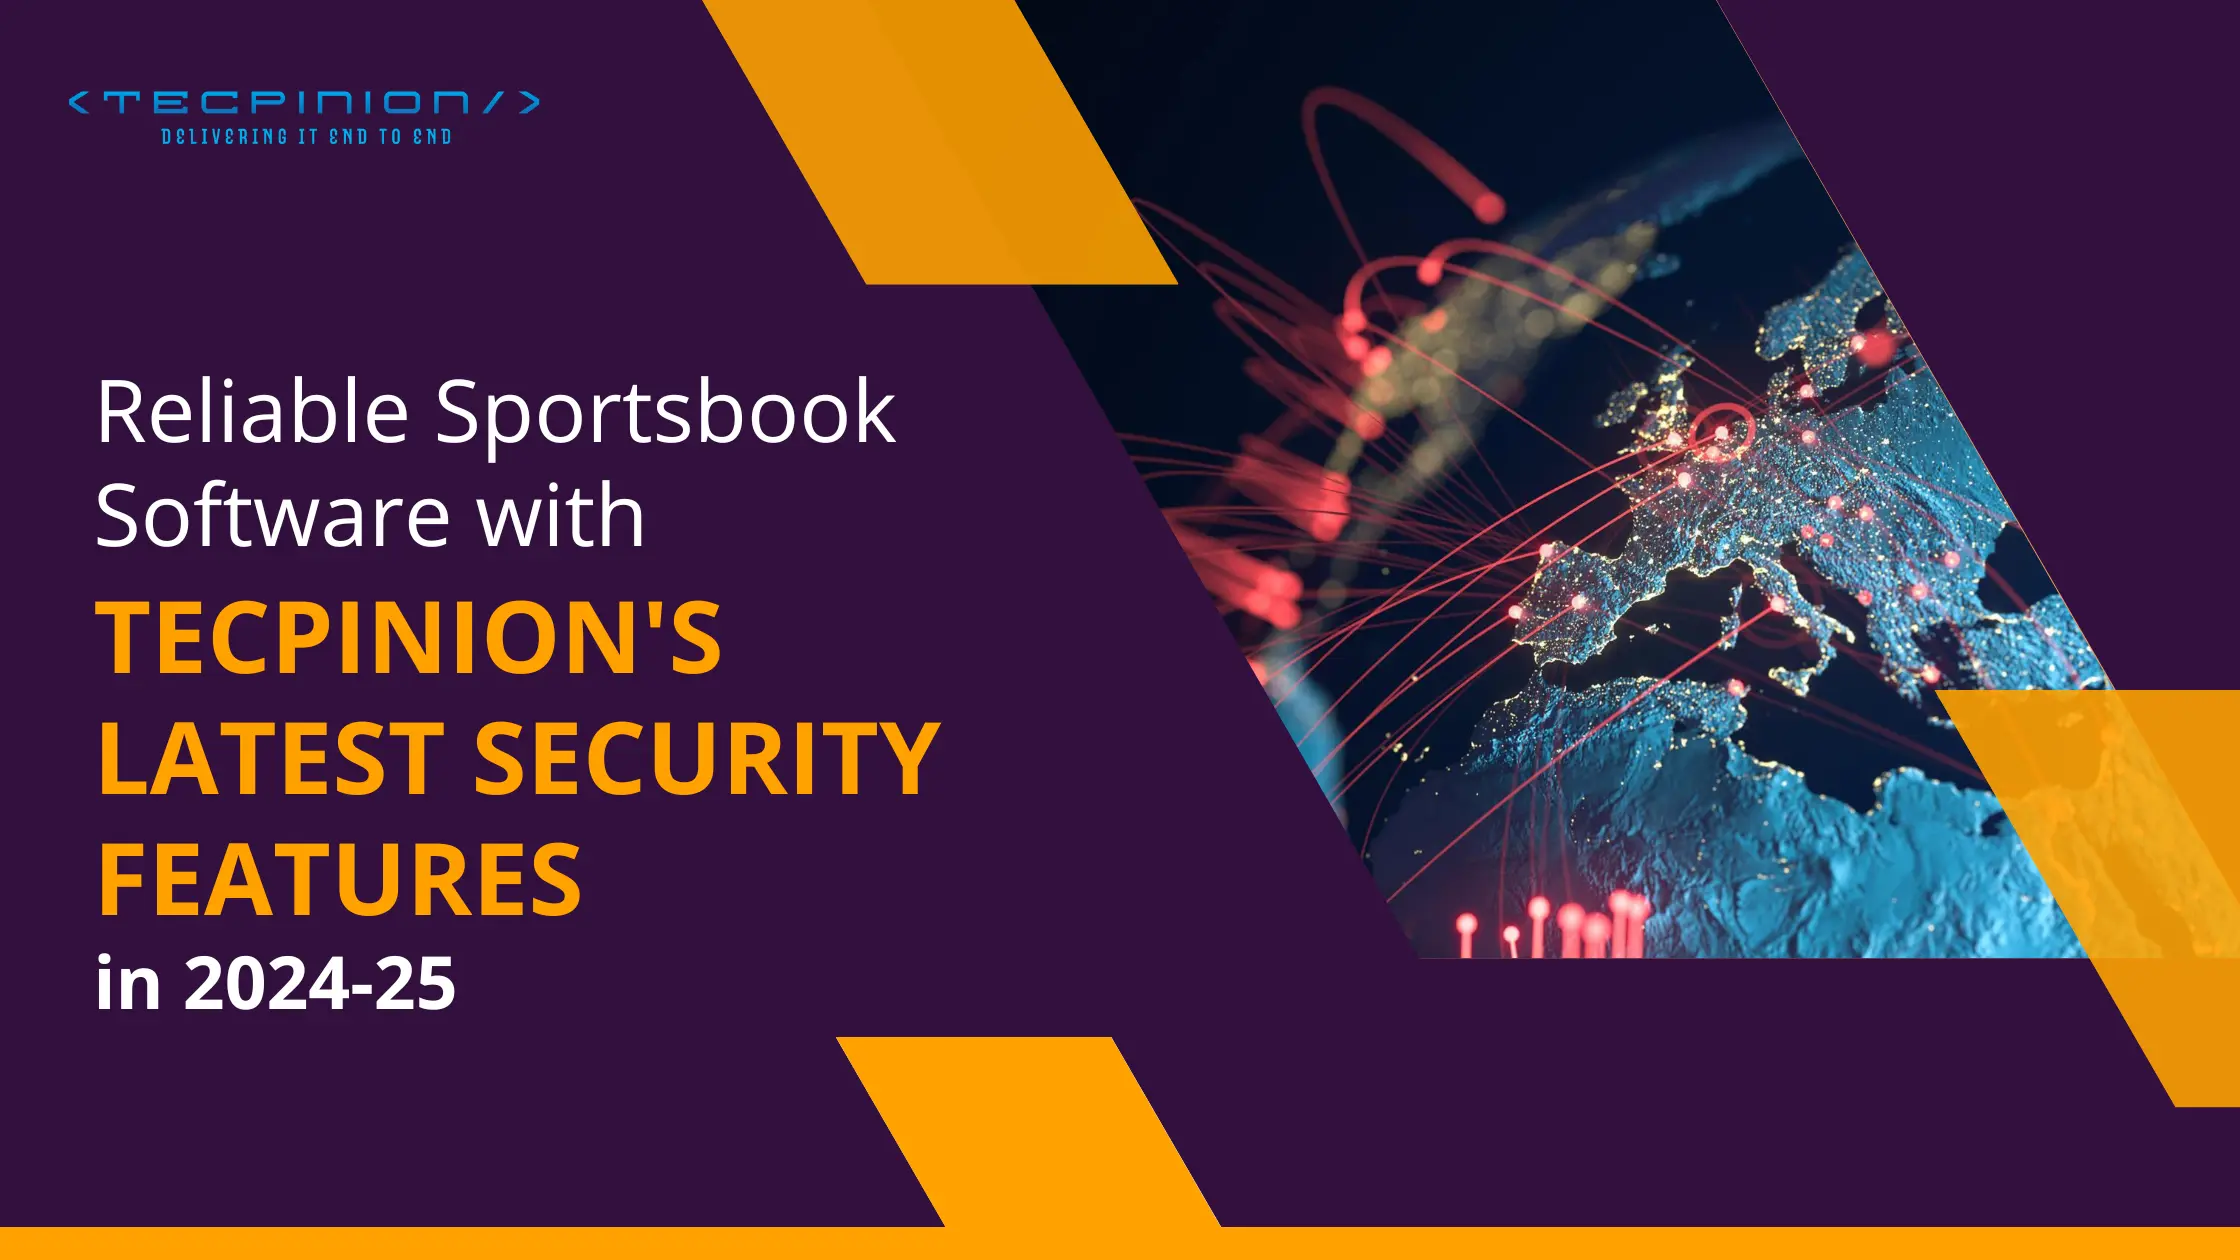 Sportsbook Software Security